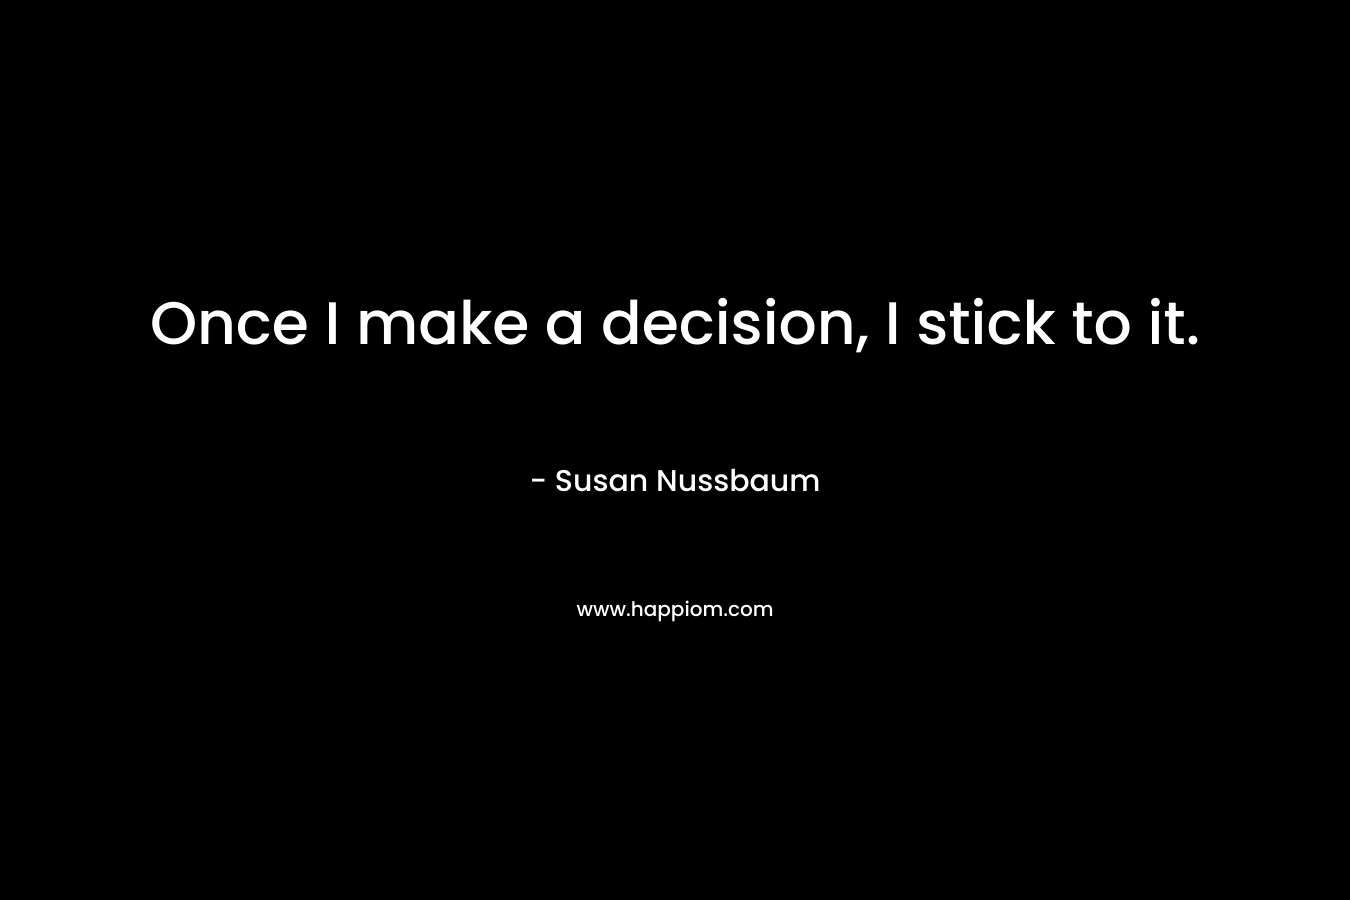 Once I make a decision, I stick to it. – Susan Nussbaum